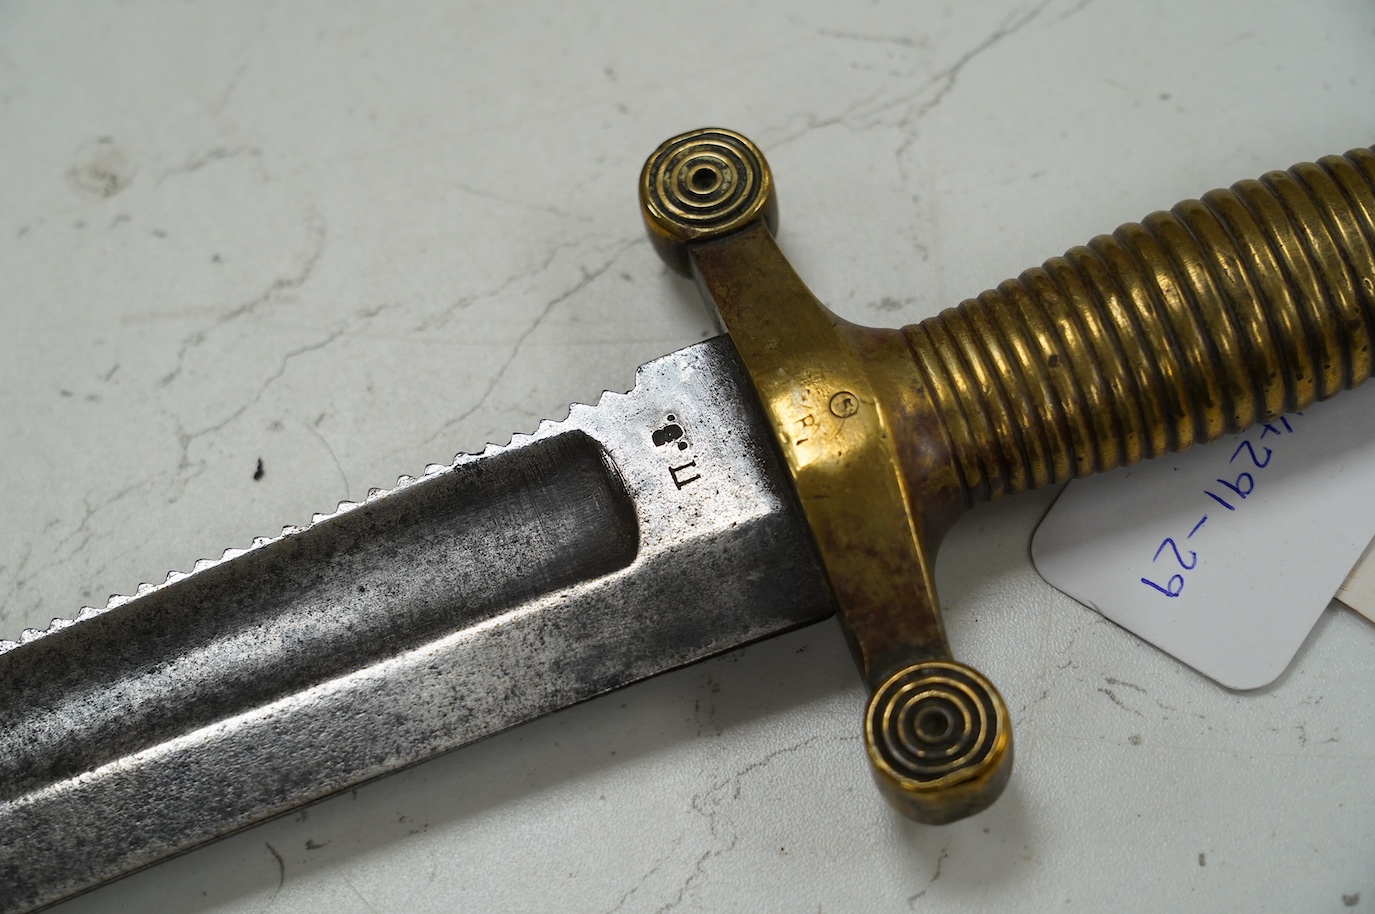 An 1847 Russian pioneer short sword, based on the French 1831 Gladius, with saw back edge, blade 48cm. Condition - good